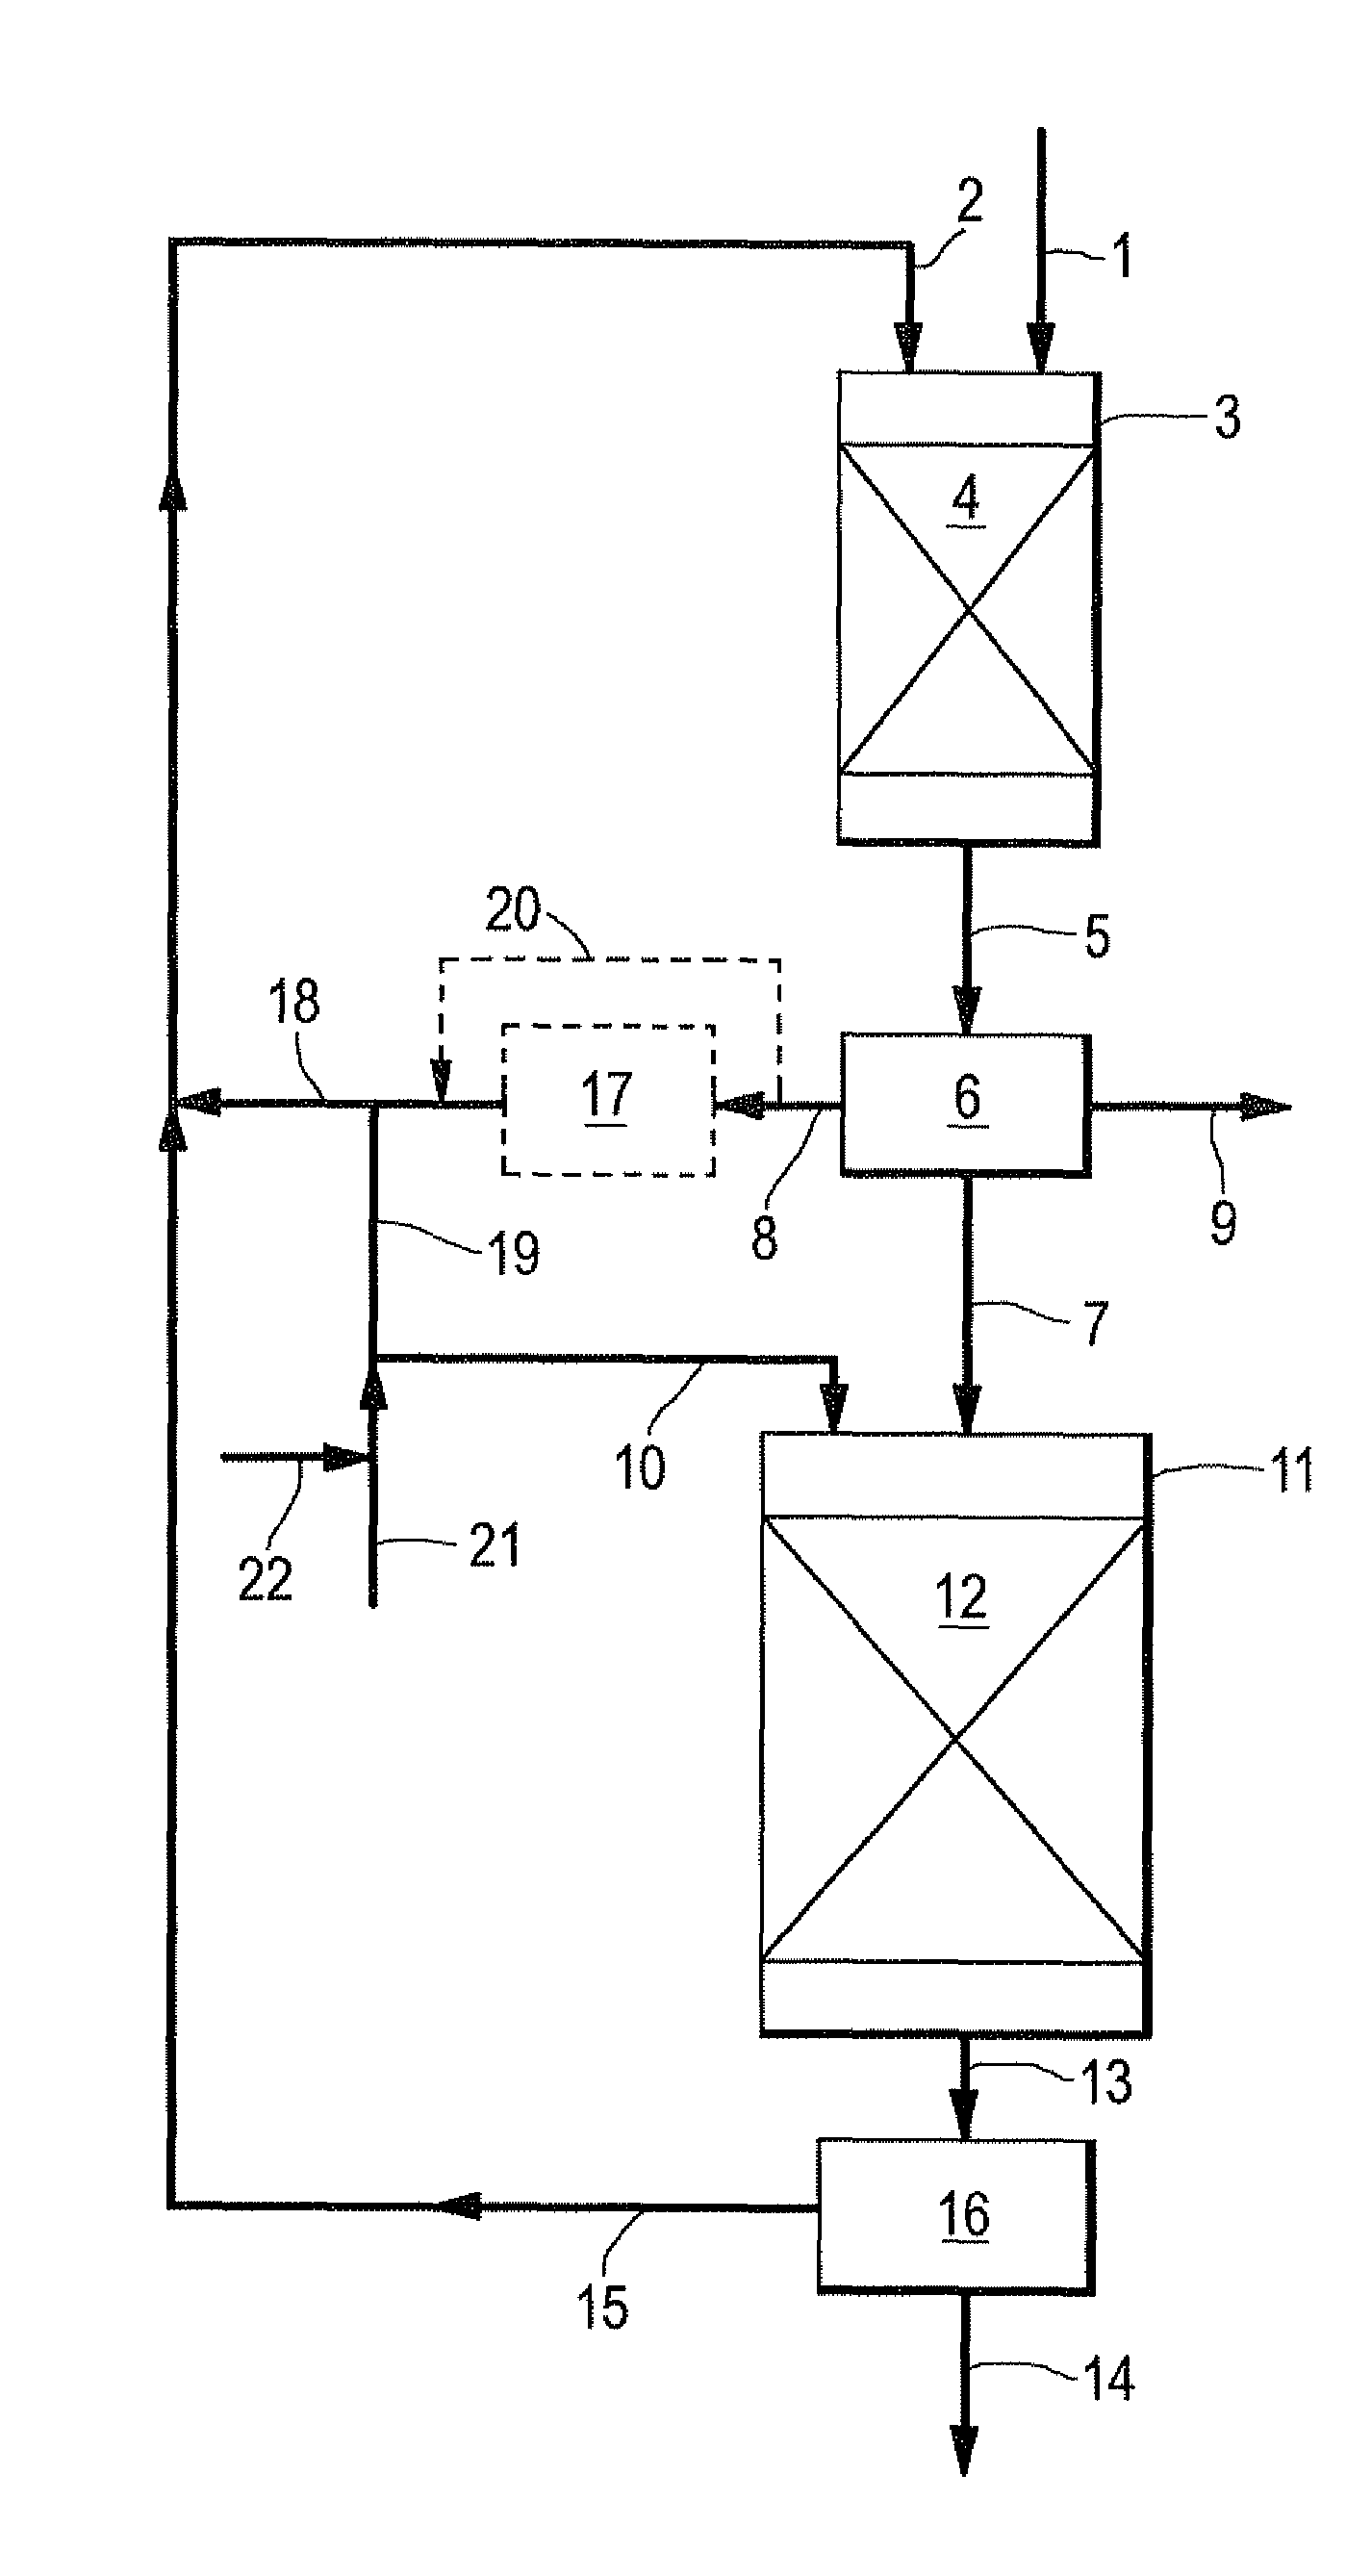 Process for producing paraffinic hydrocarbons